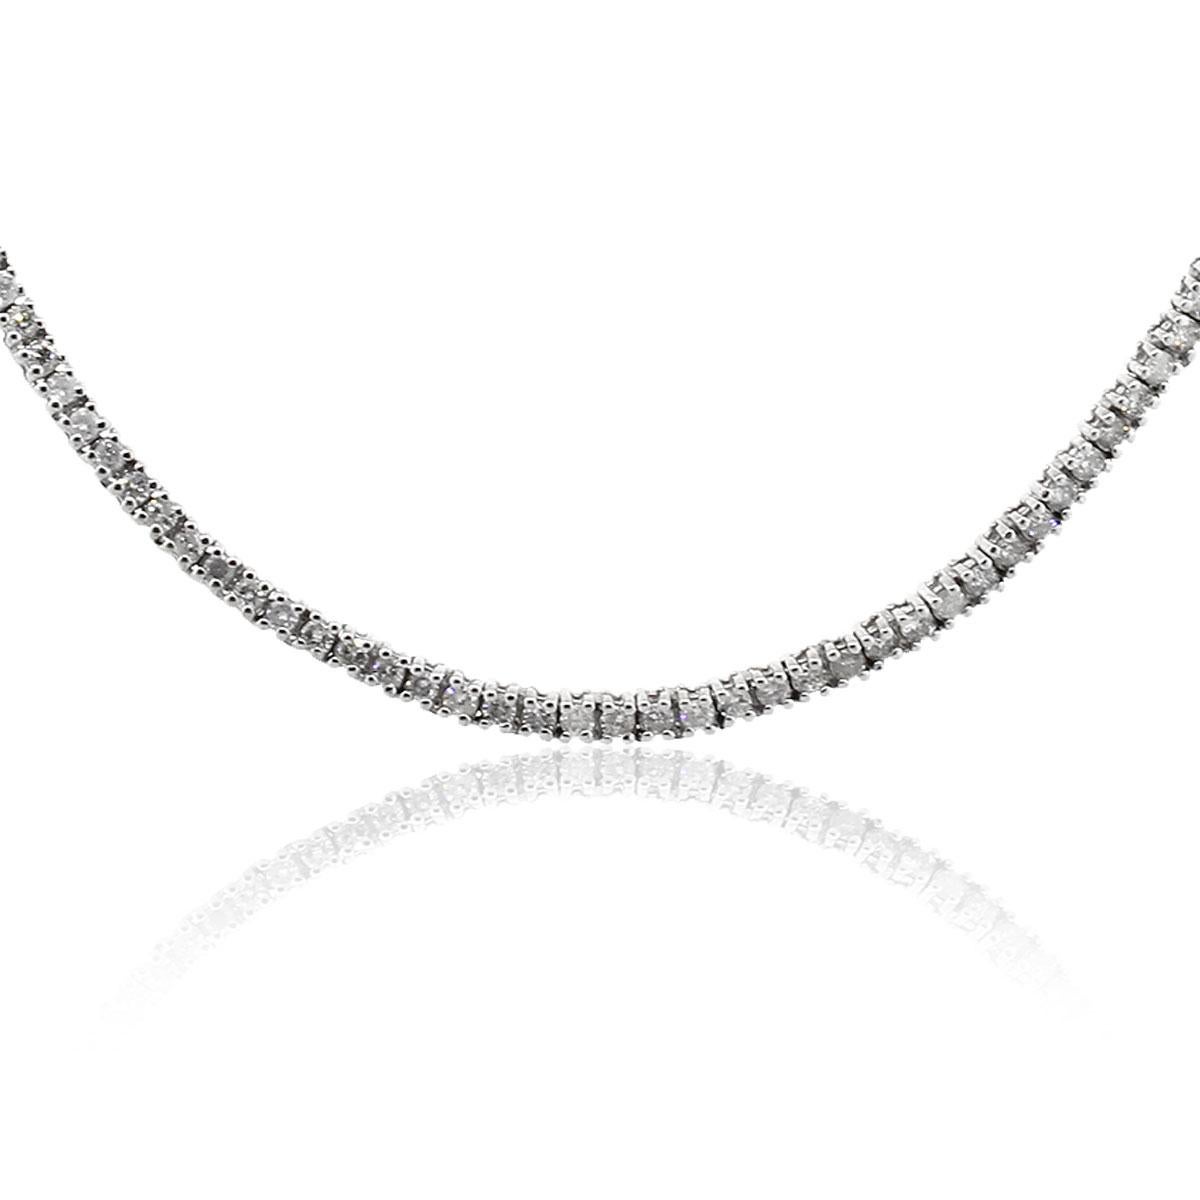 Material: 14k White Gold
Diamond Details: Approximately 10ctw of round diamonds. Diamonds are H/I in color and SI-I in clarity
Measurements: Necklace measures 24.75″
Fastening: Tongue in box clasp with safety latch
Item Weight: 30.7g (1938dwt)
SKU: